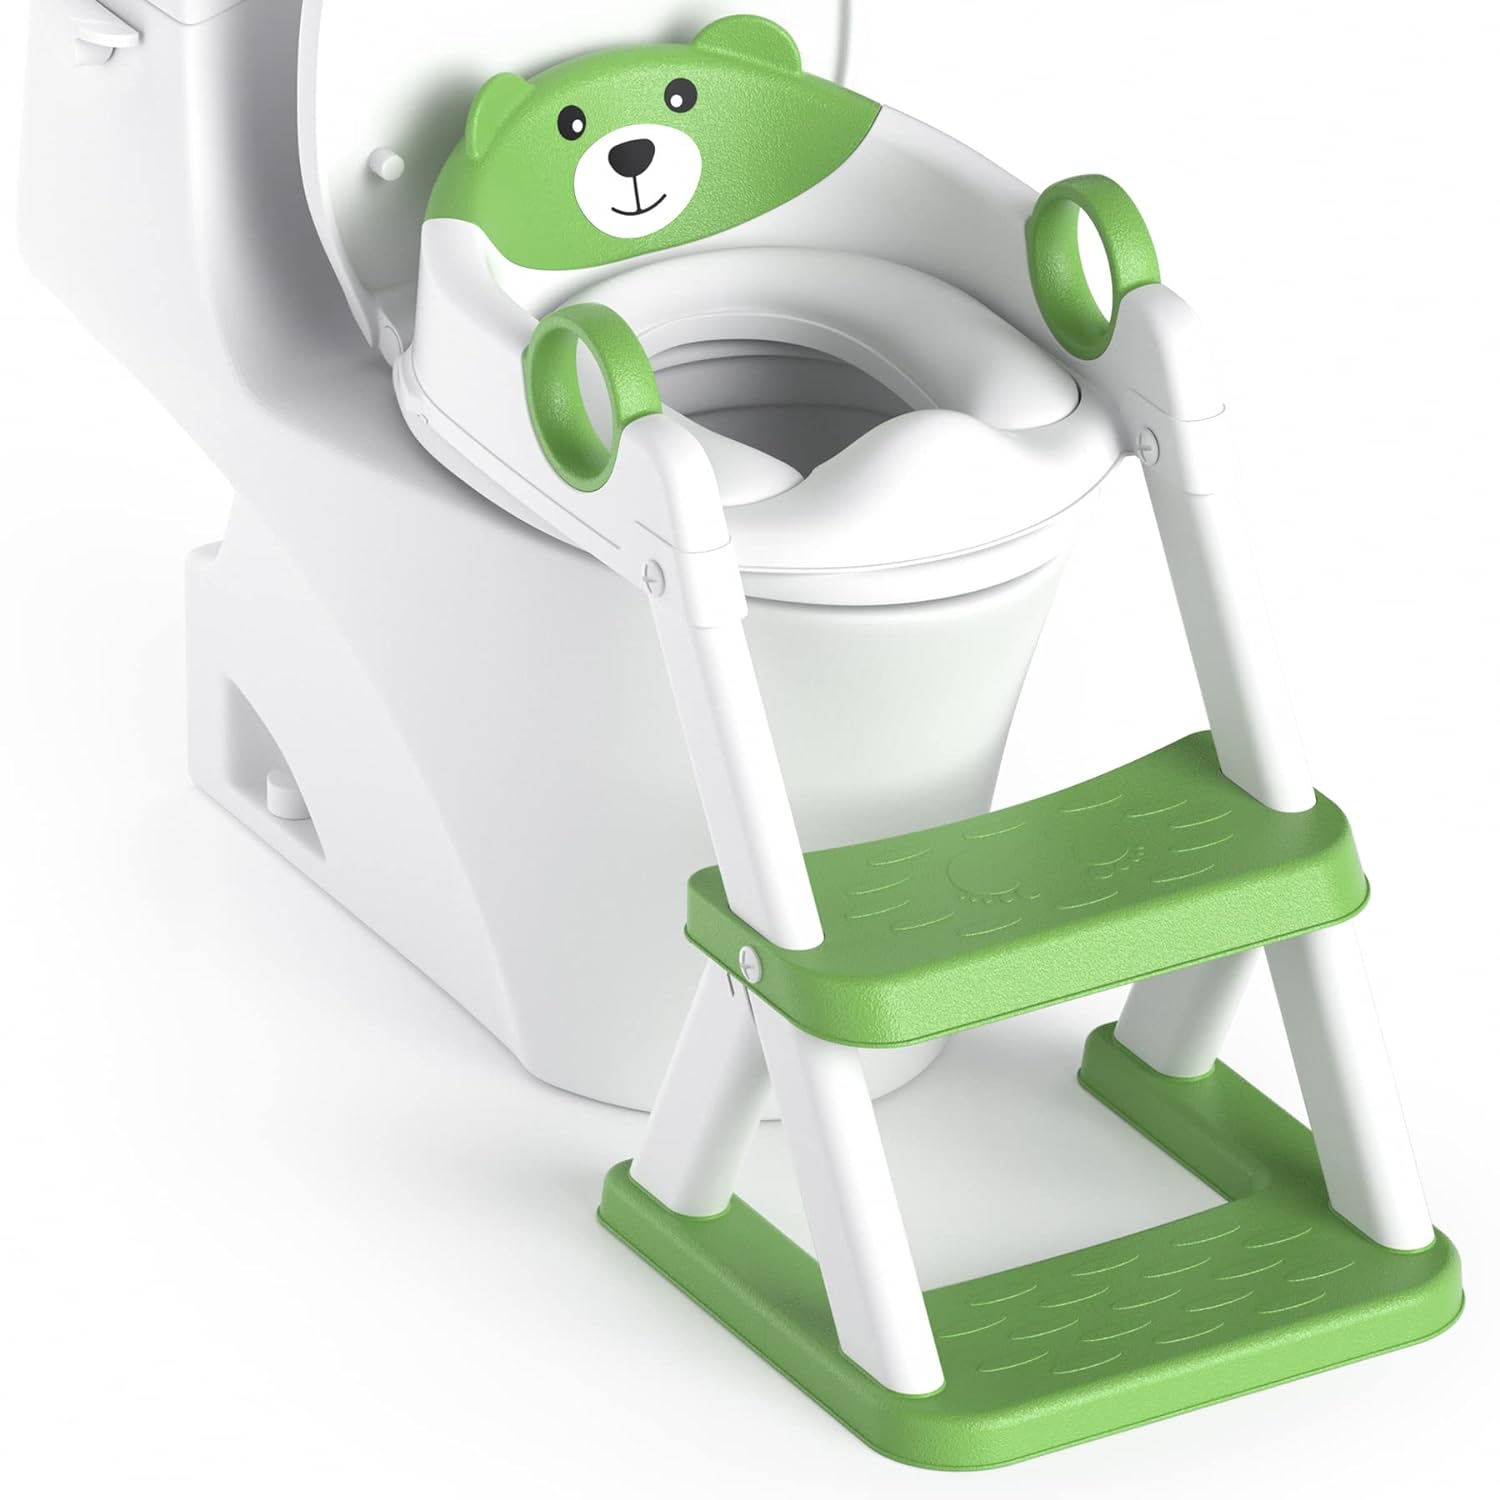 2-in-1 Step Stool and Potty Training Nursery Furniture